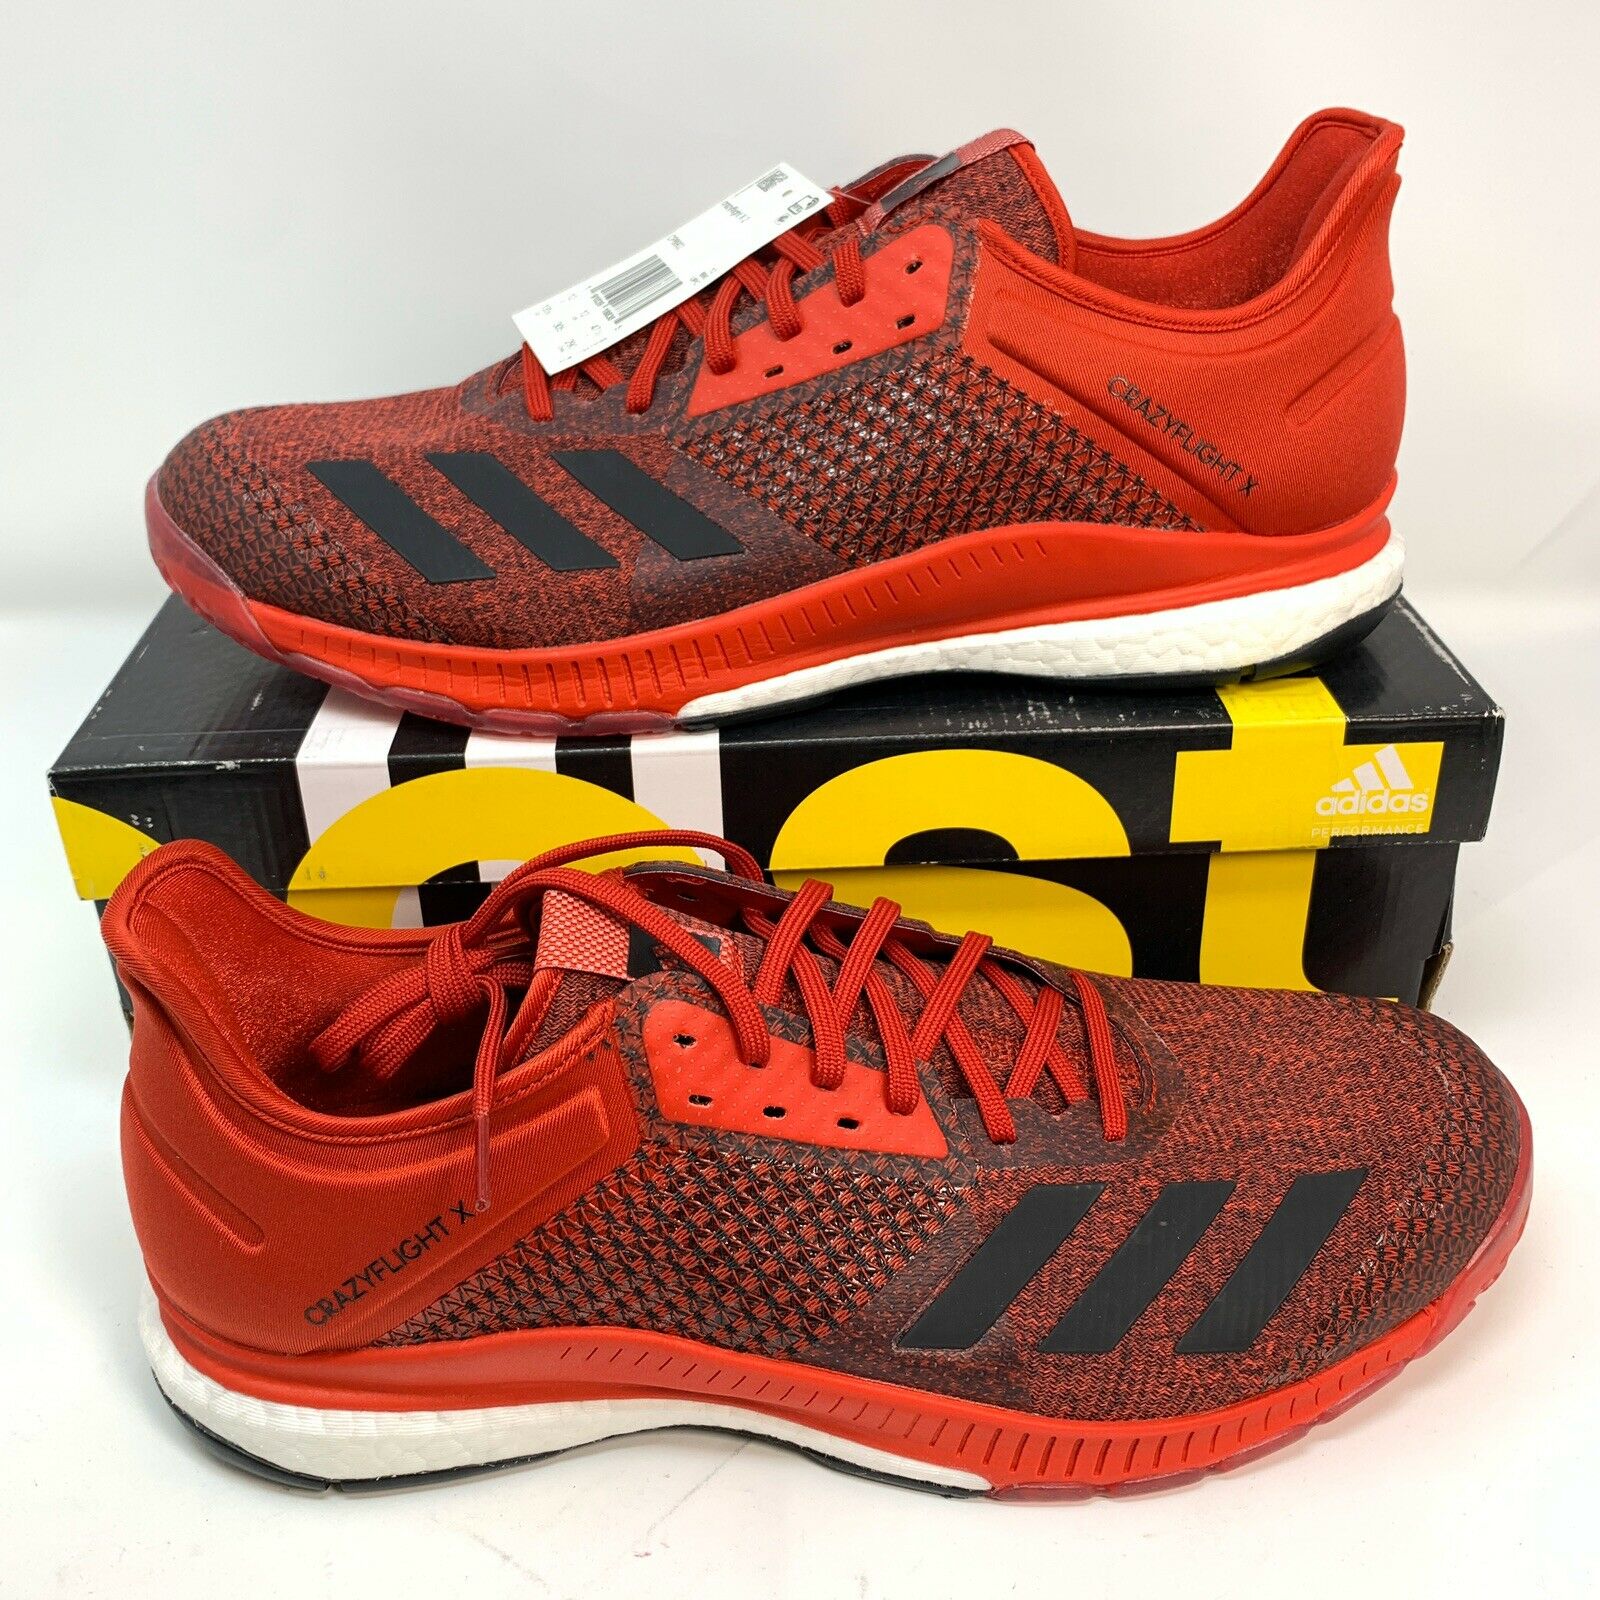 Adidas Crazyflight X 2.0 Boost Red Volleyball CP8902 Shoes Women's Size 13.5